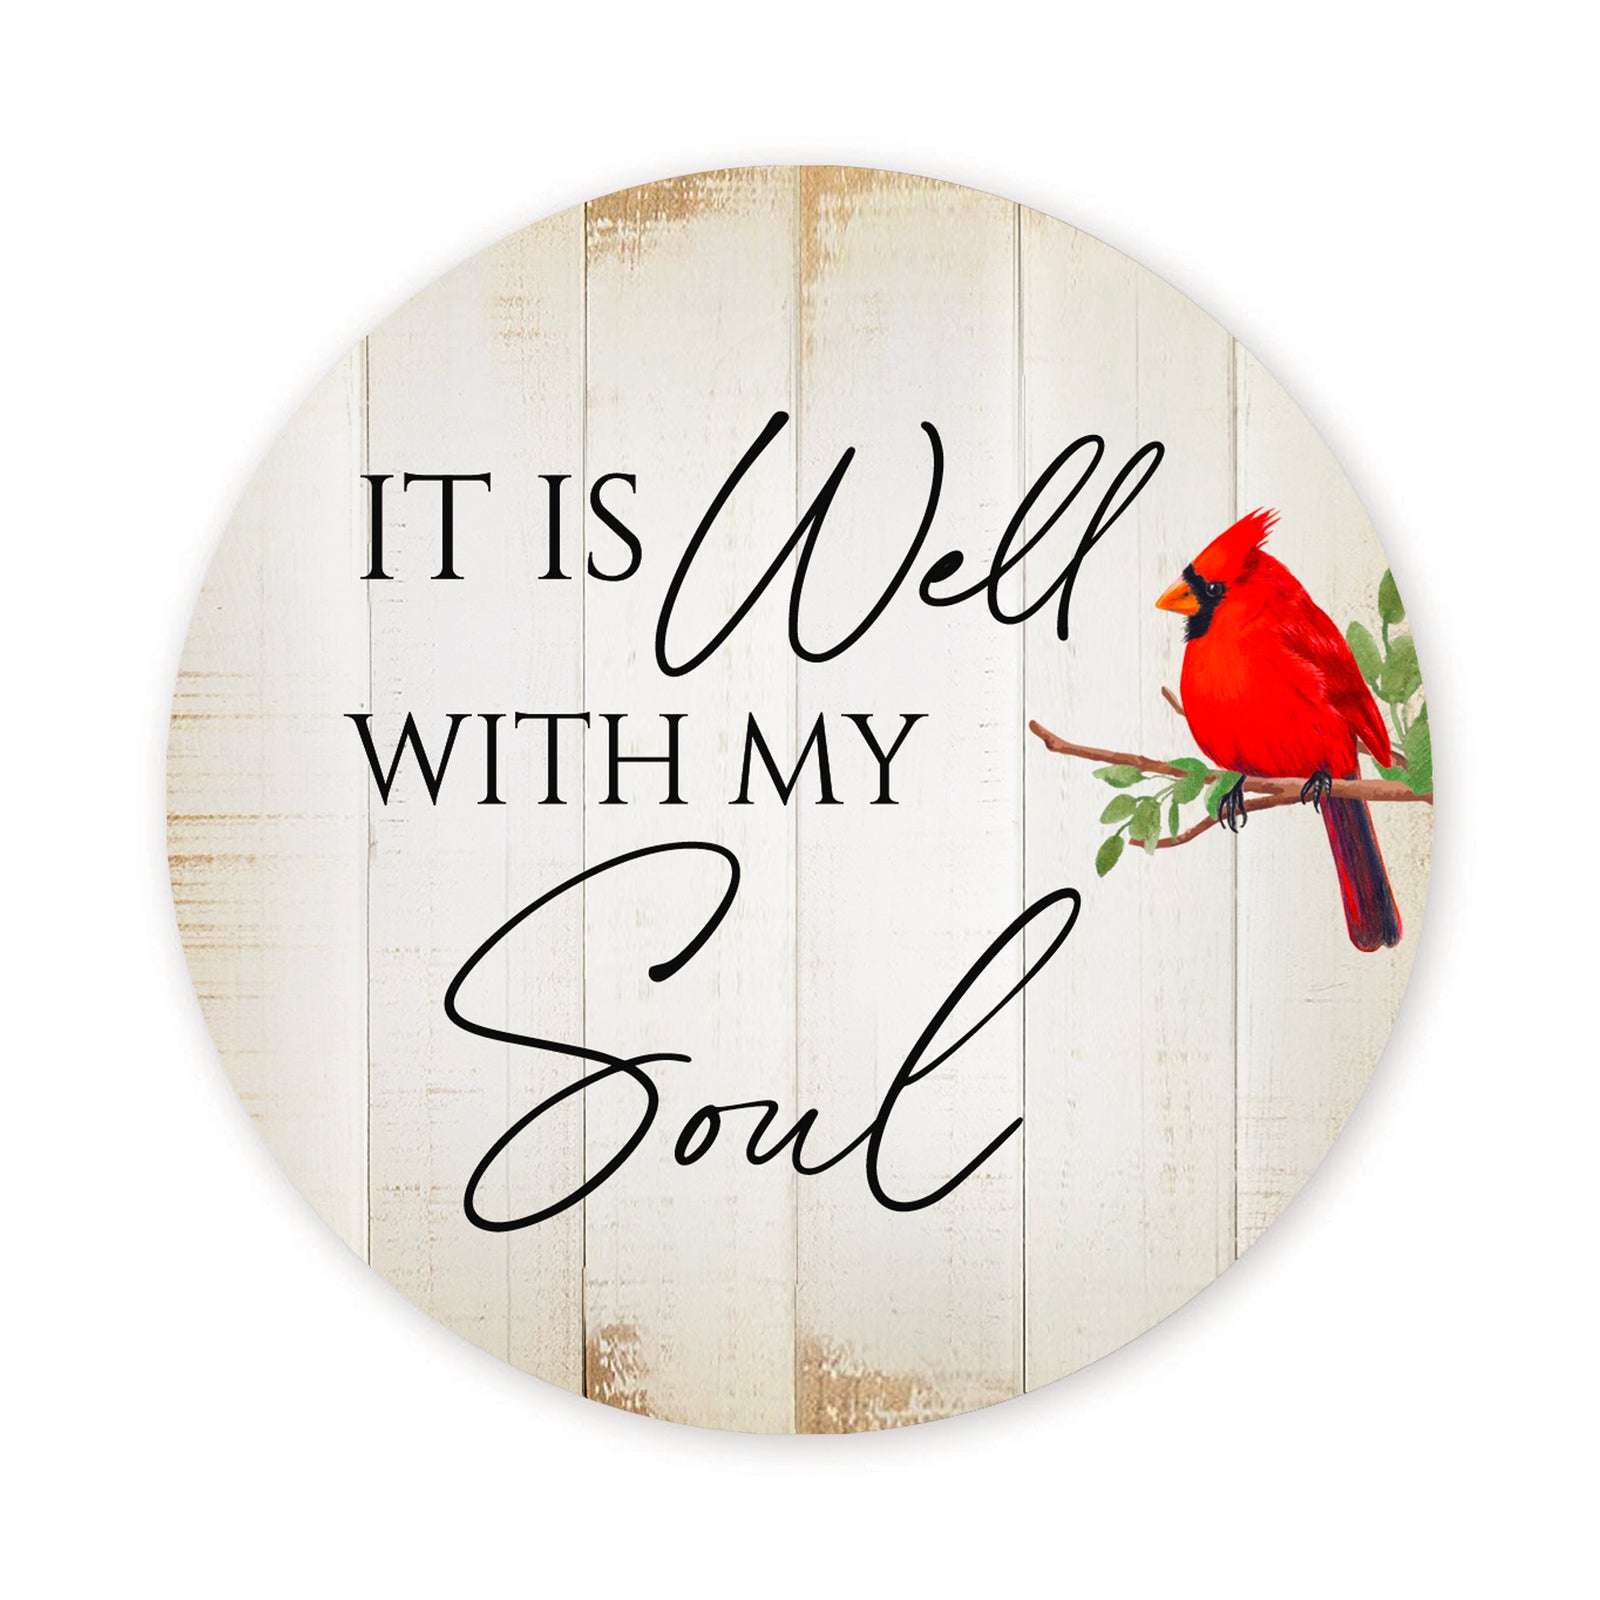 Vintage-Inspired Cardinal Wooden Magnet Printed With Everyday Inspirational Verses Gift Ideas - It Is Well